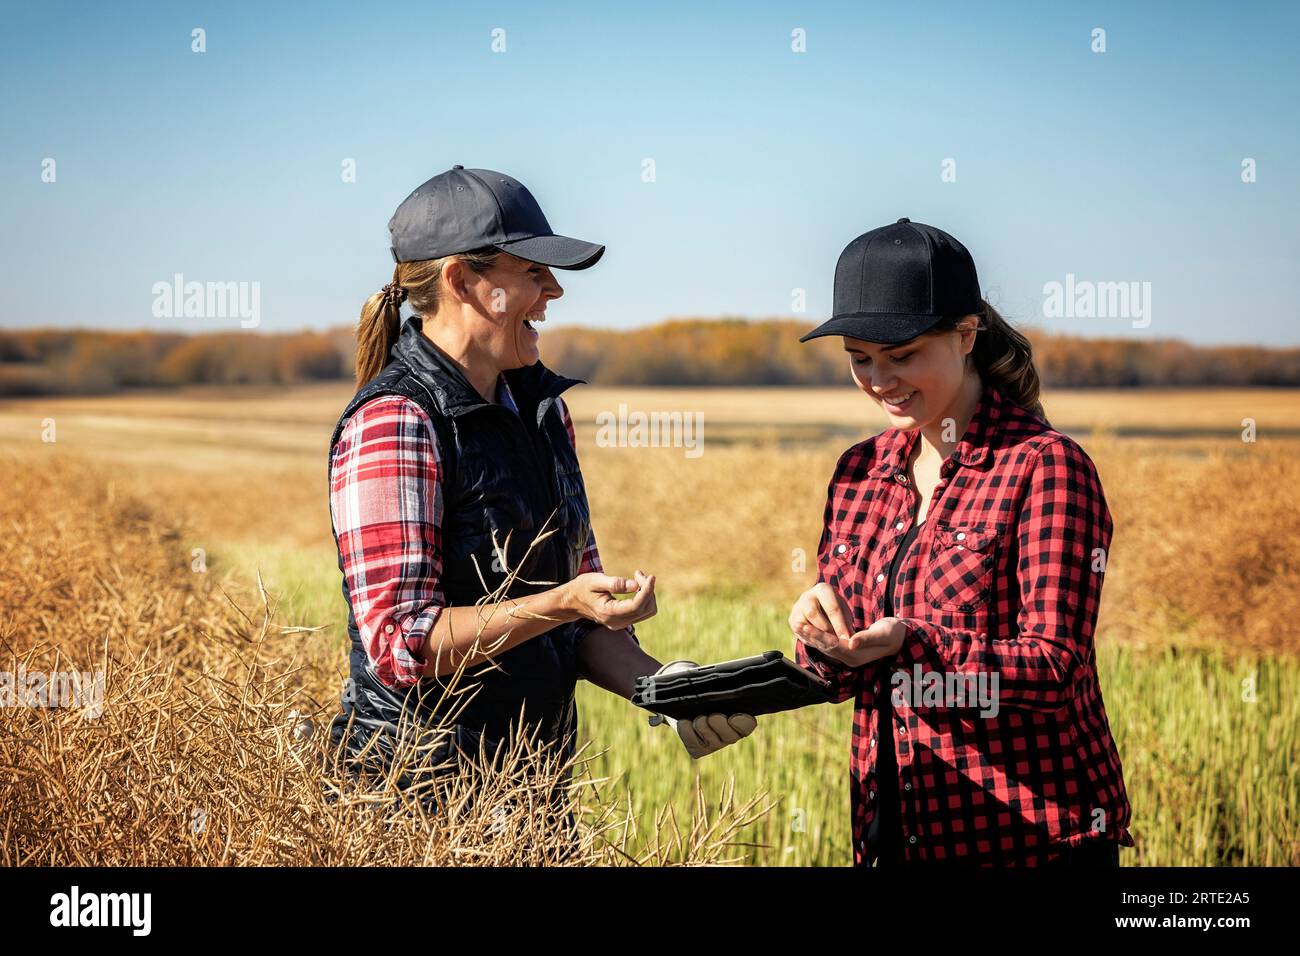 A woman farmer standing in the fields enjoying teaching her apprentice about modern farming techniques for canola crops using wireless technologies... Stock Photo